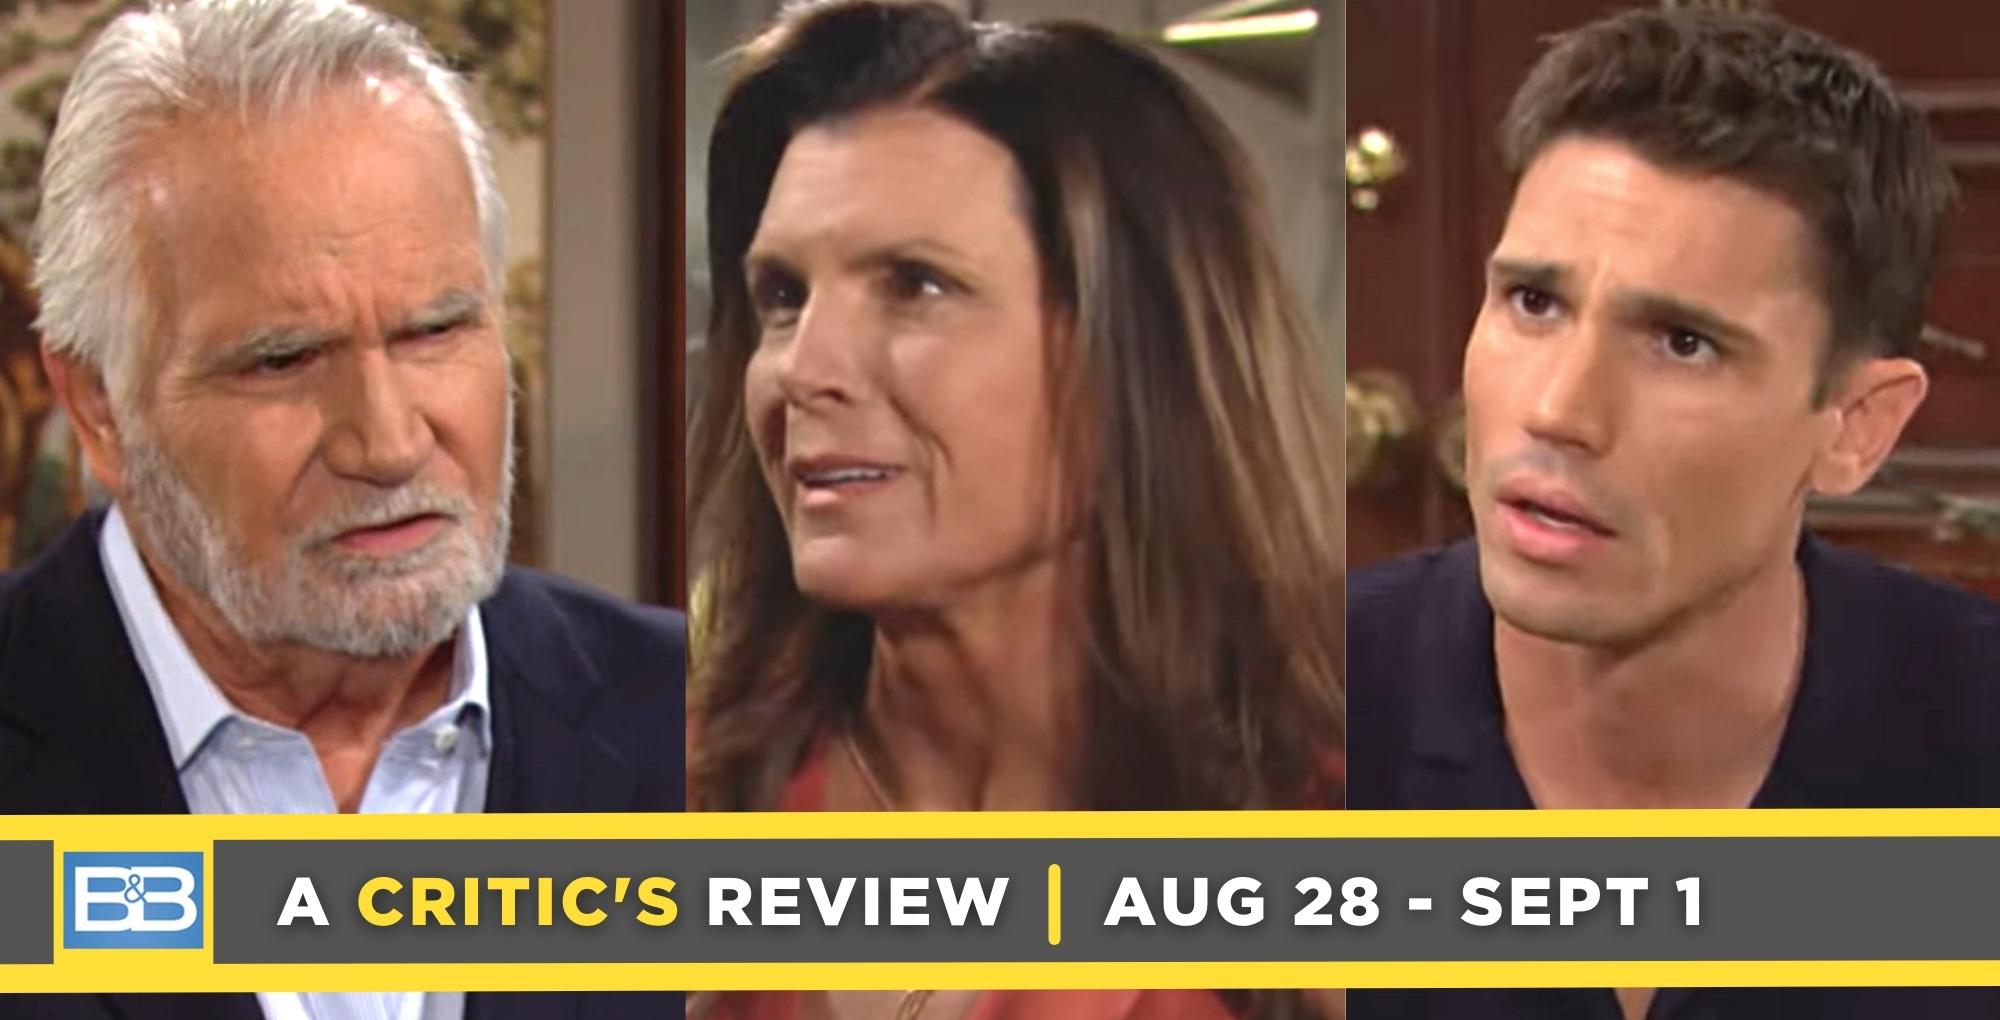 the bold and the beautiful critic's review for august 28 – september 1, 2023, three images, eric, sheila, and finn.